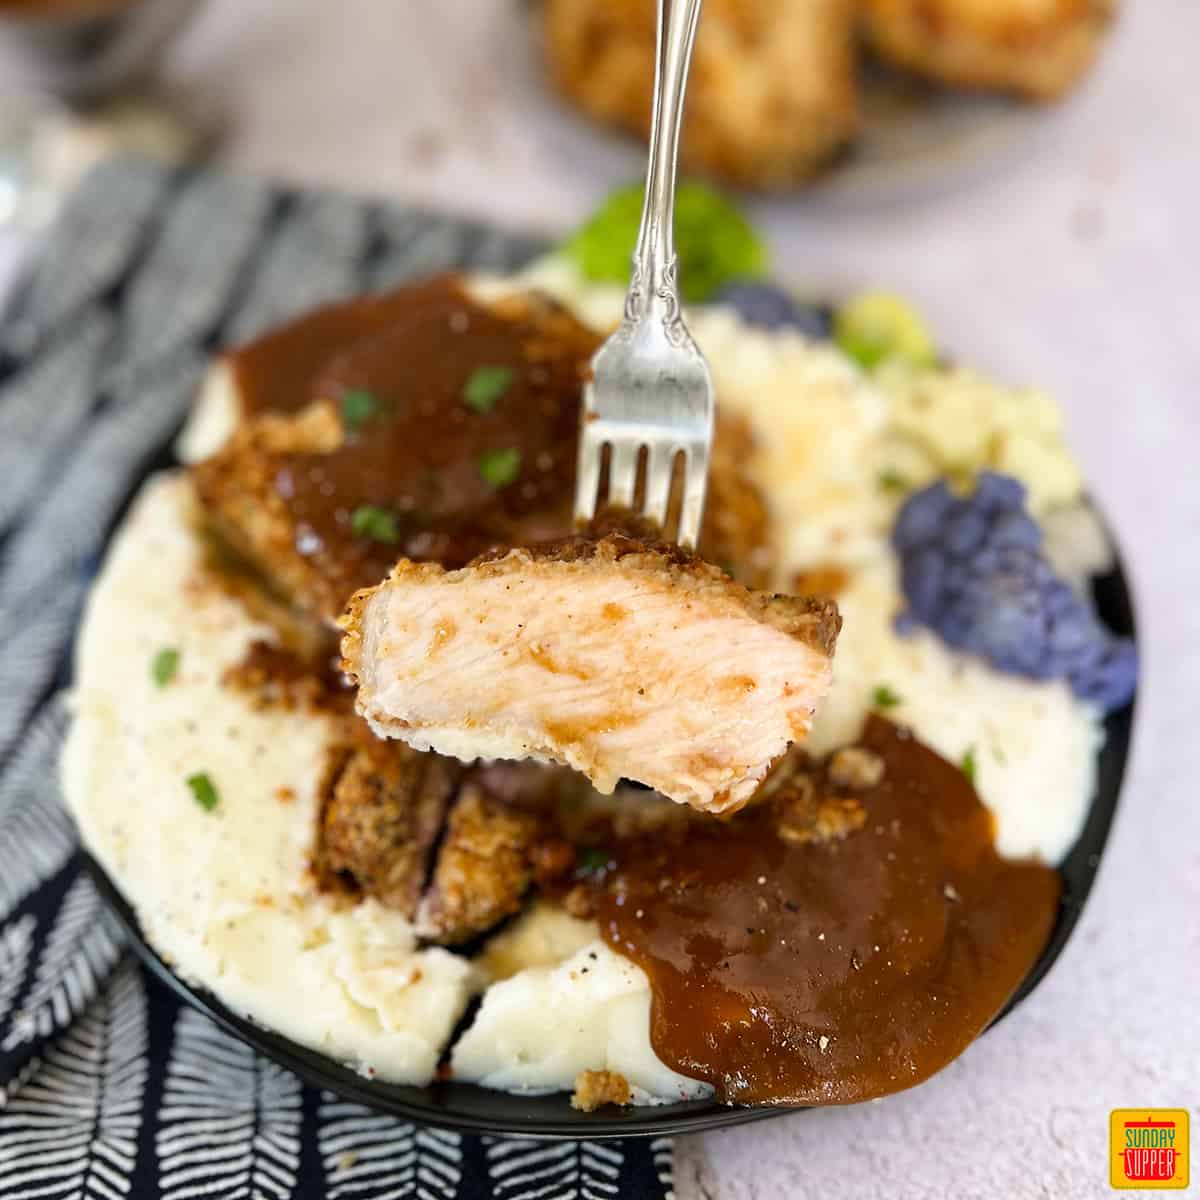 oven baked pork chops over mashed potatoes with pork gravy